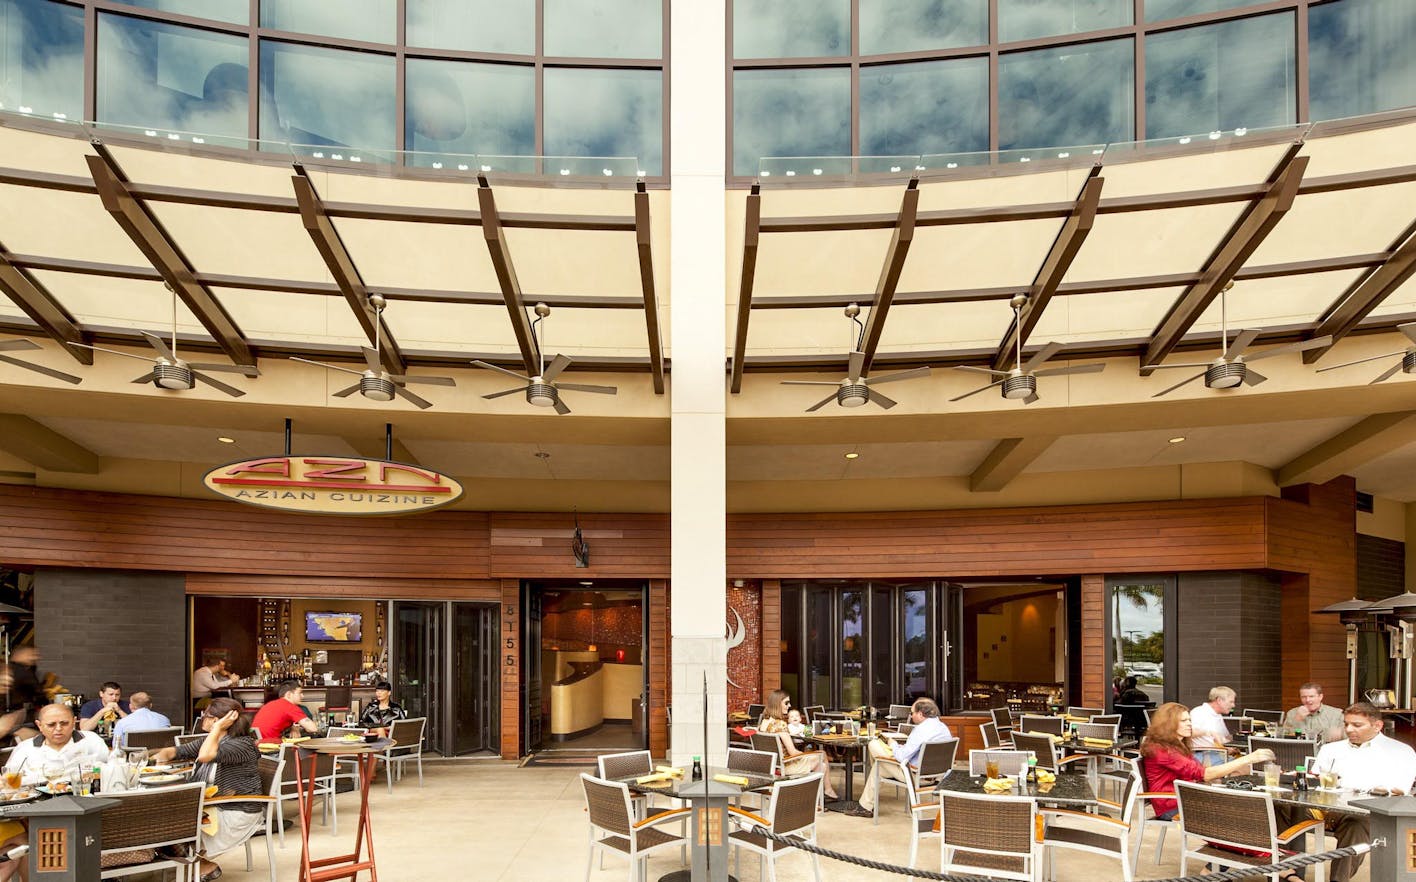 open restaurant design facilitates outdoor dining with moving glass walls